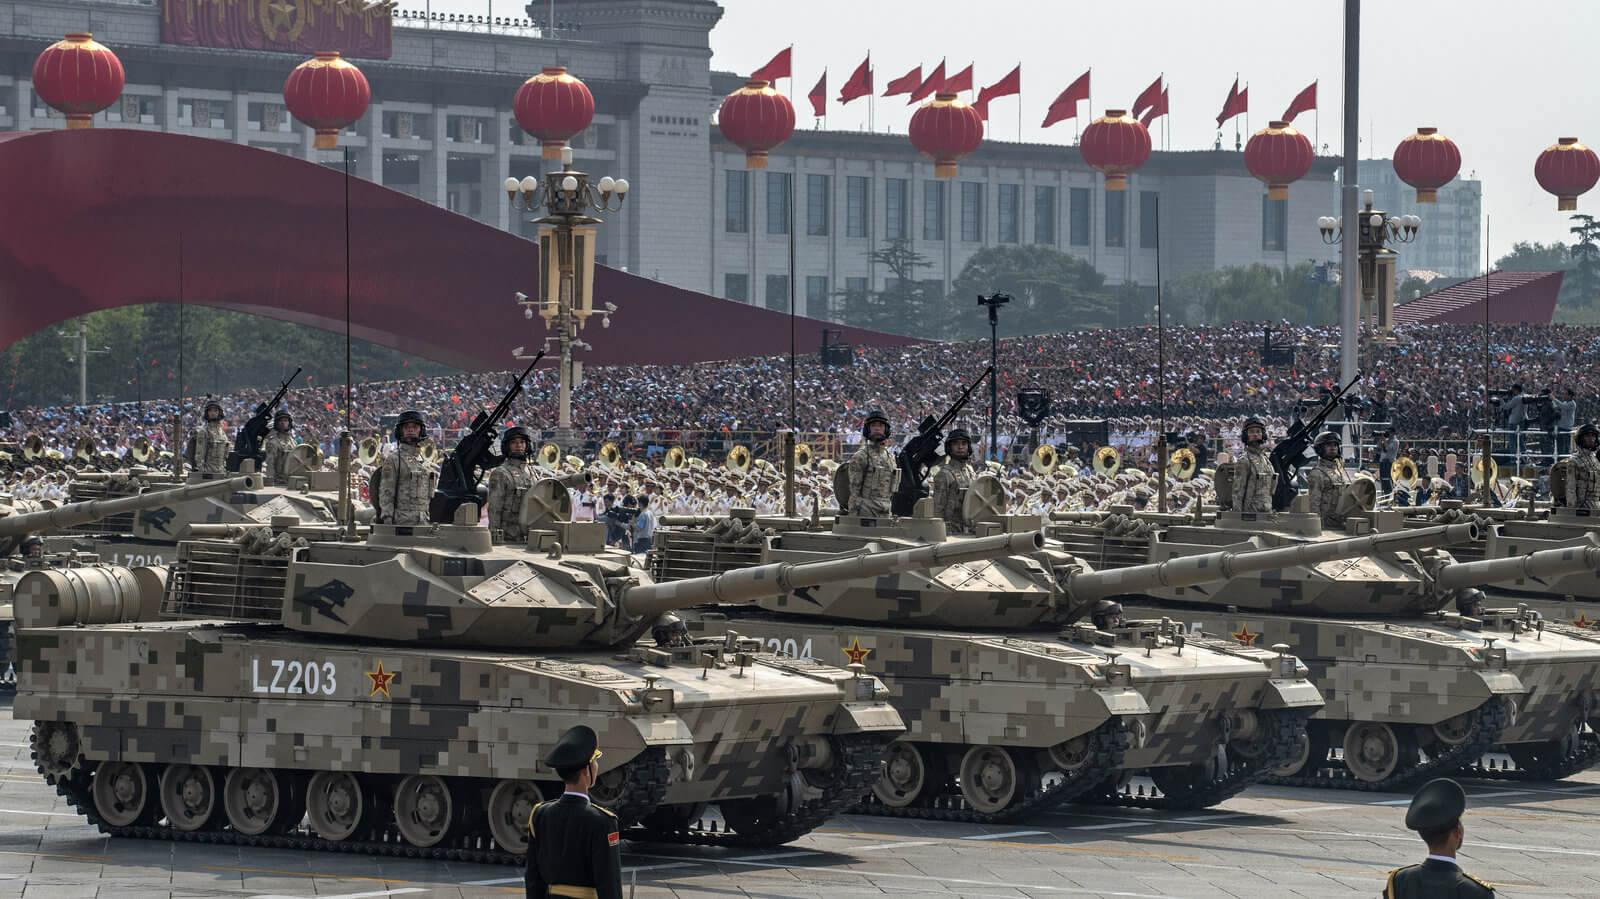 Four Chinese Defence Equipment Companies Listed in World’s Top 25 Arms Manufacturers